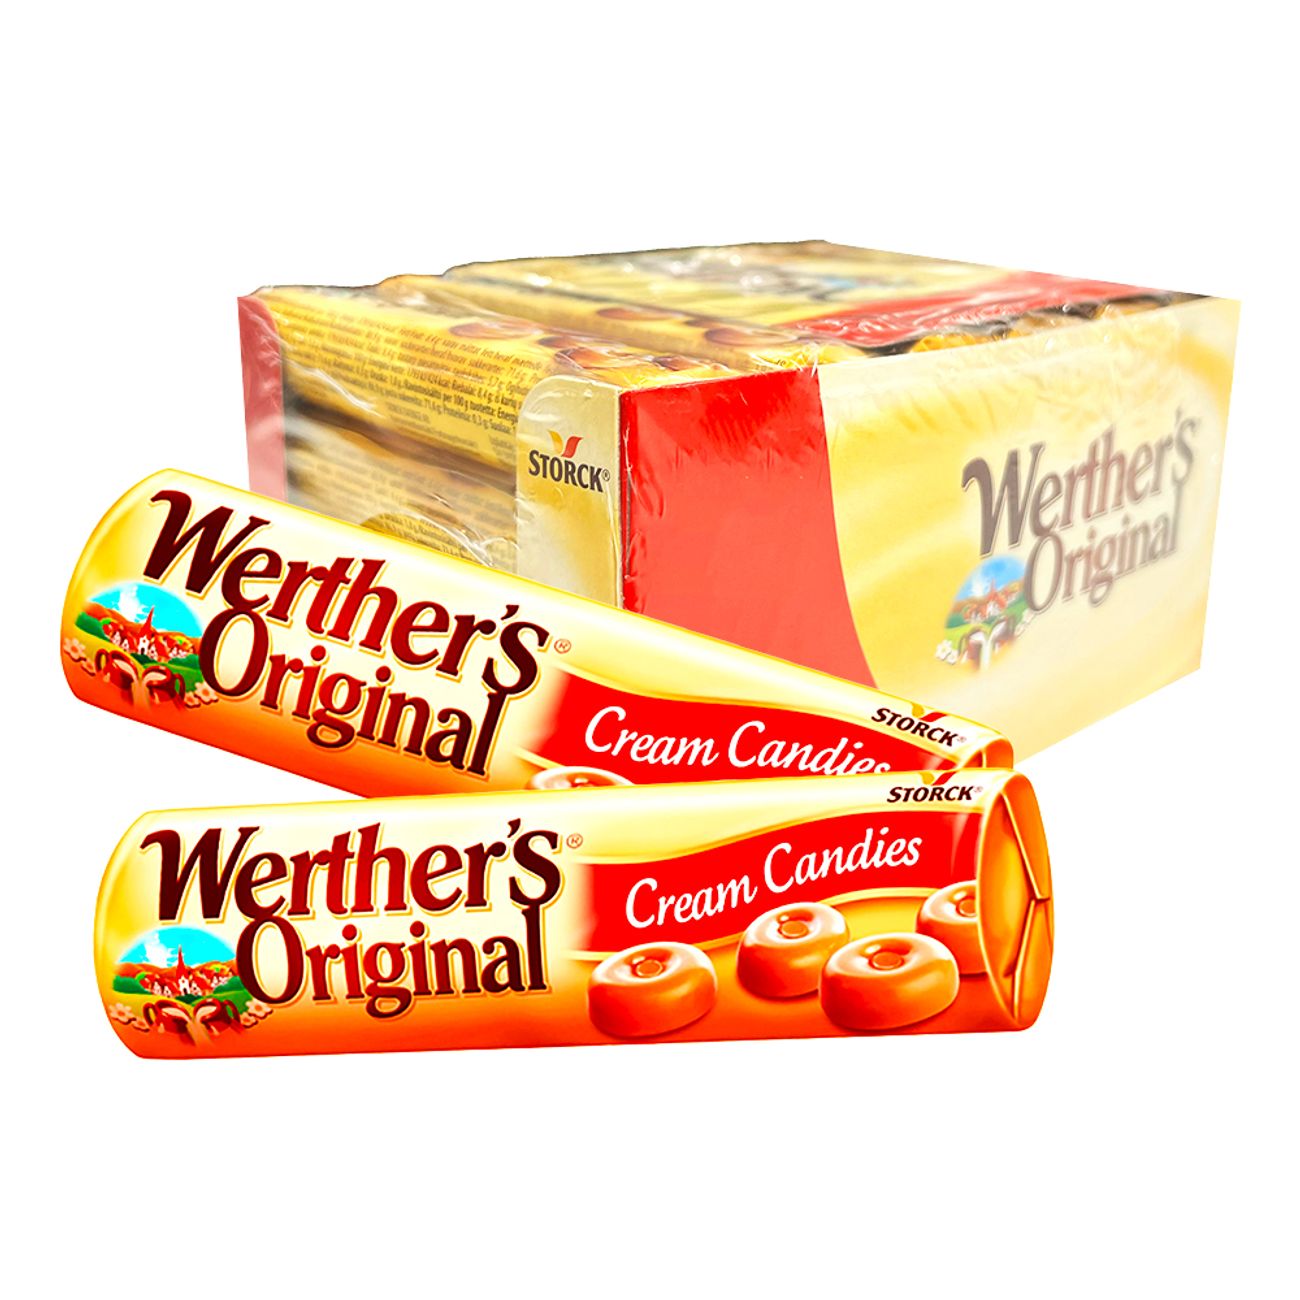 werthers-original-rulle-storpack-60479-2